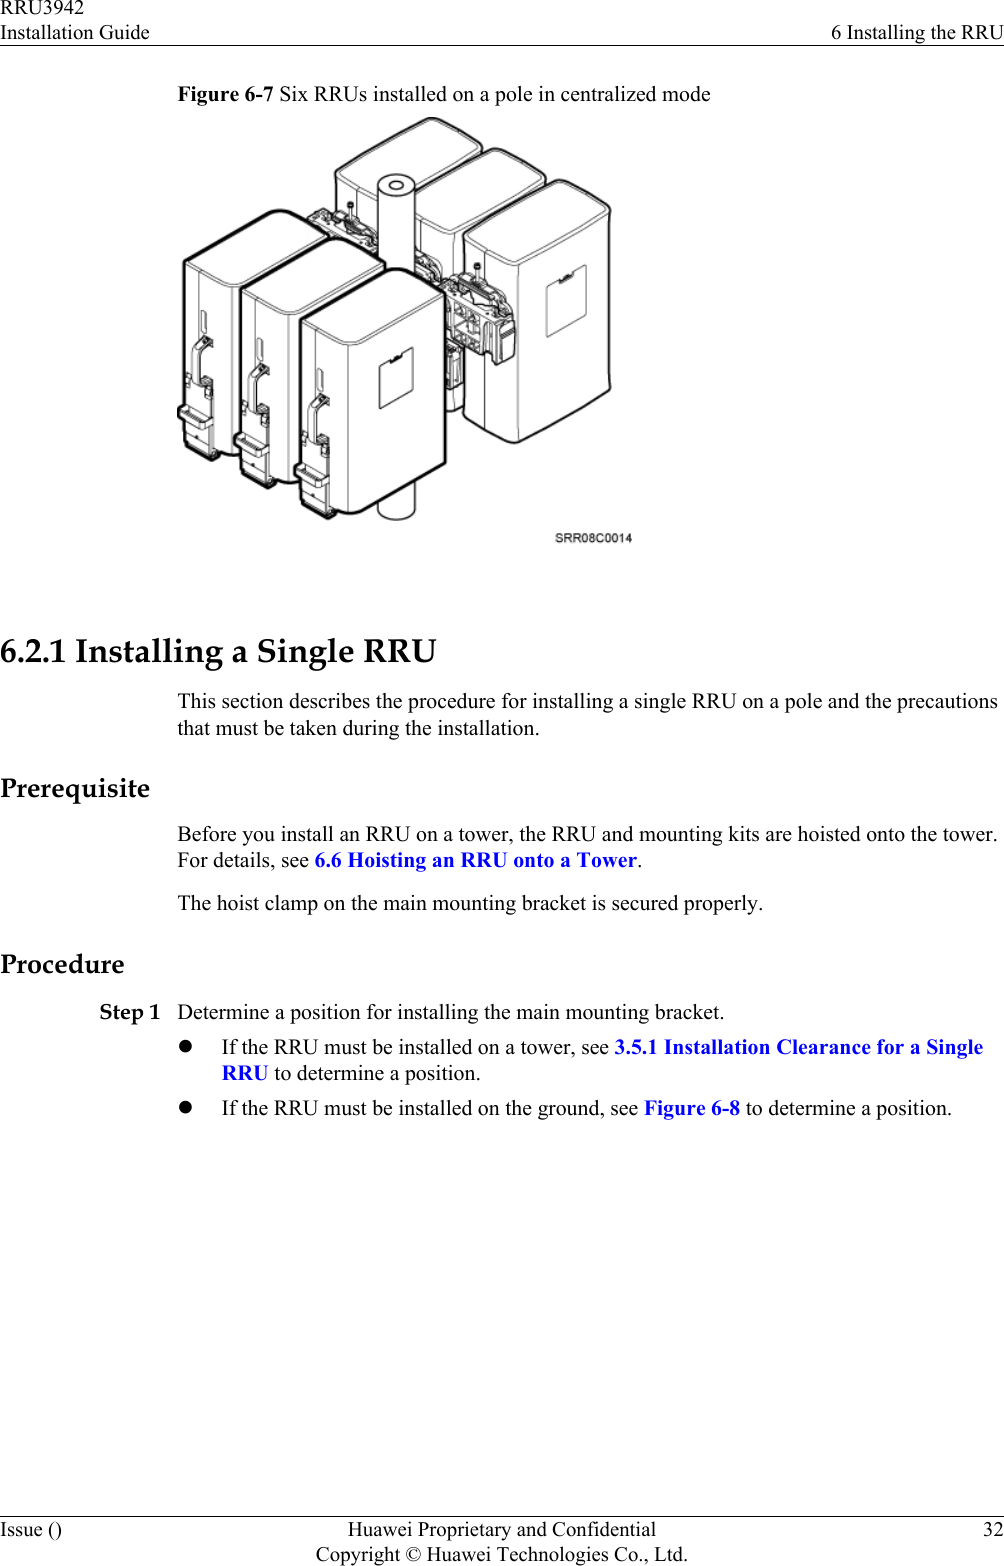 Figure 6-7 Six RRUs installed on a pole in centralized mode 6.2.1 Installing a Single RRUThis section describes the procedure for installing a single RRU on a pole and the precautionsthat must be taken during the installation.PrerequisiteBefore you install an RRU on a tower, the RRU and mounting kits are hoisted onto the tower.For details, see 6.6 Hoisting an RRU onto a Tower.The hoist clamp on the main mounting bracket is secured properly.ProcedureStep 1 Determine a position for installing the main mounting bracket.lIf the RRU must be installed on a tower, see 3.5.1 Installation Clearance for a SingleRRU to determine a position.lIf the RRU must be installed on the ground, see Figure 6-8 to determine a position.RRU3942Installation Guide 6 Installing the RRUIssue () Huawei Proprietary and ConfidentialCopyright © Huawei Technologies Co., Ltd.32